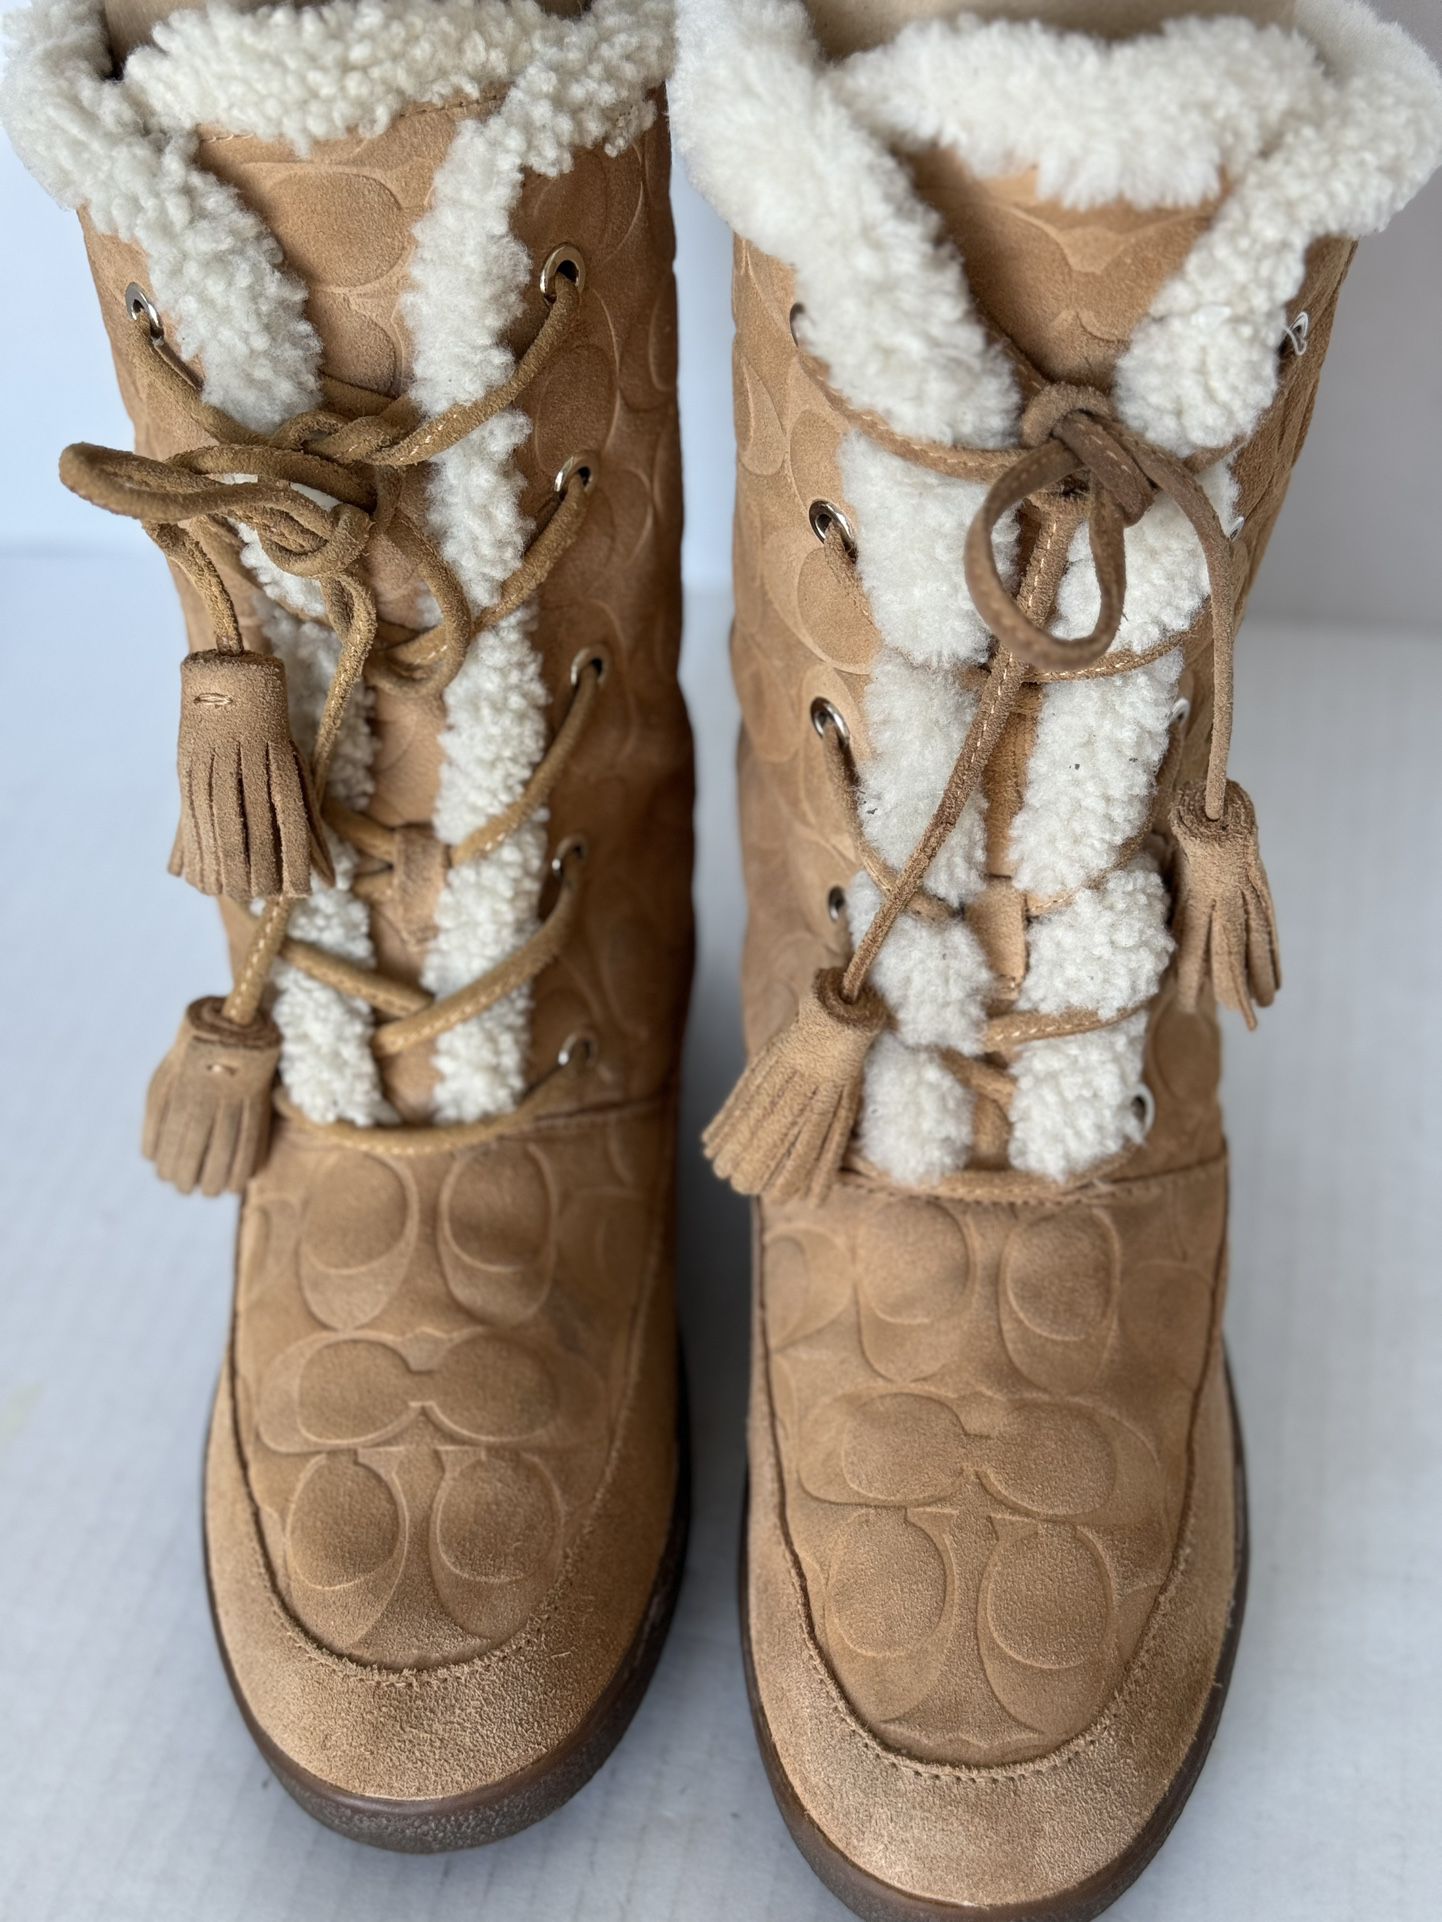 Coach Tuesday Camel Natural Suede Logo Tie Tassel Boots A7408 Sz 8